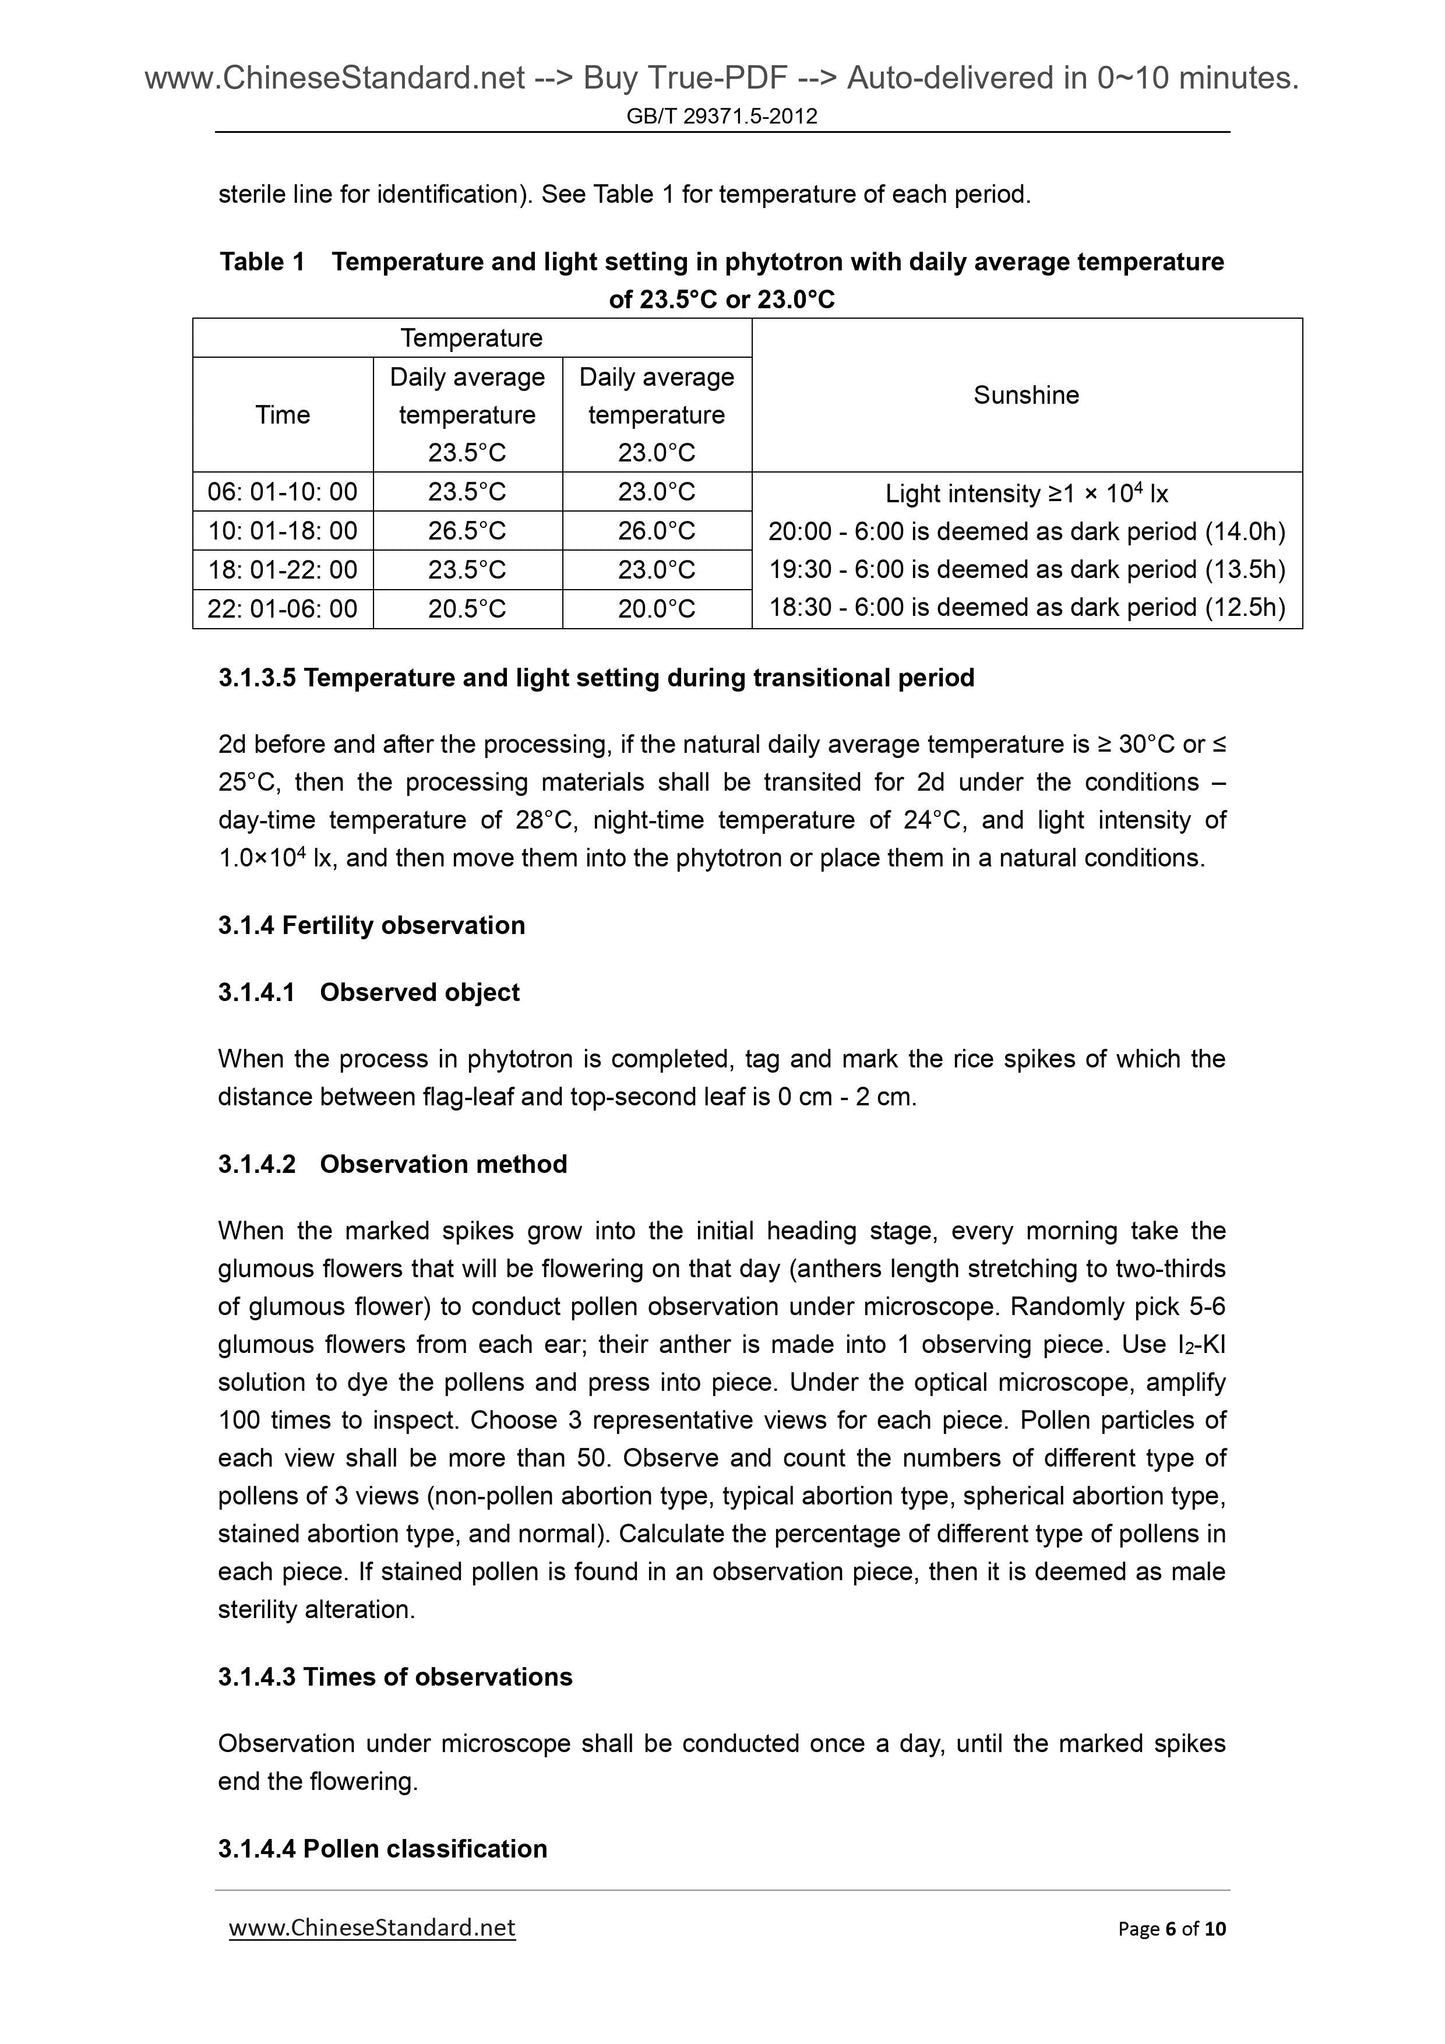 GB/T 29371.5-2012 Page 5